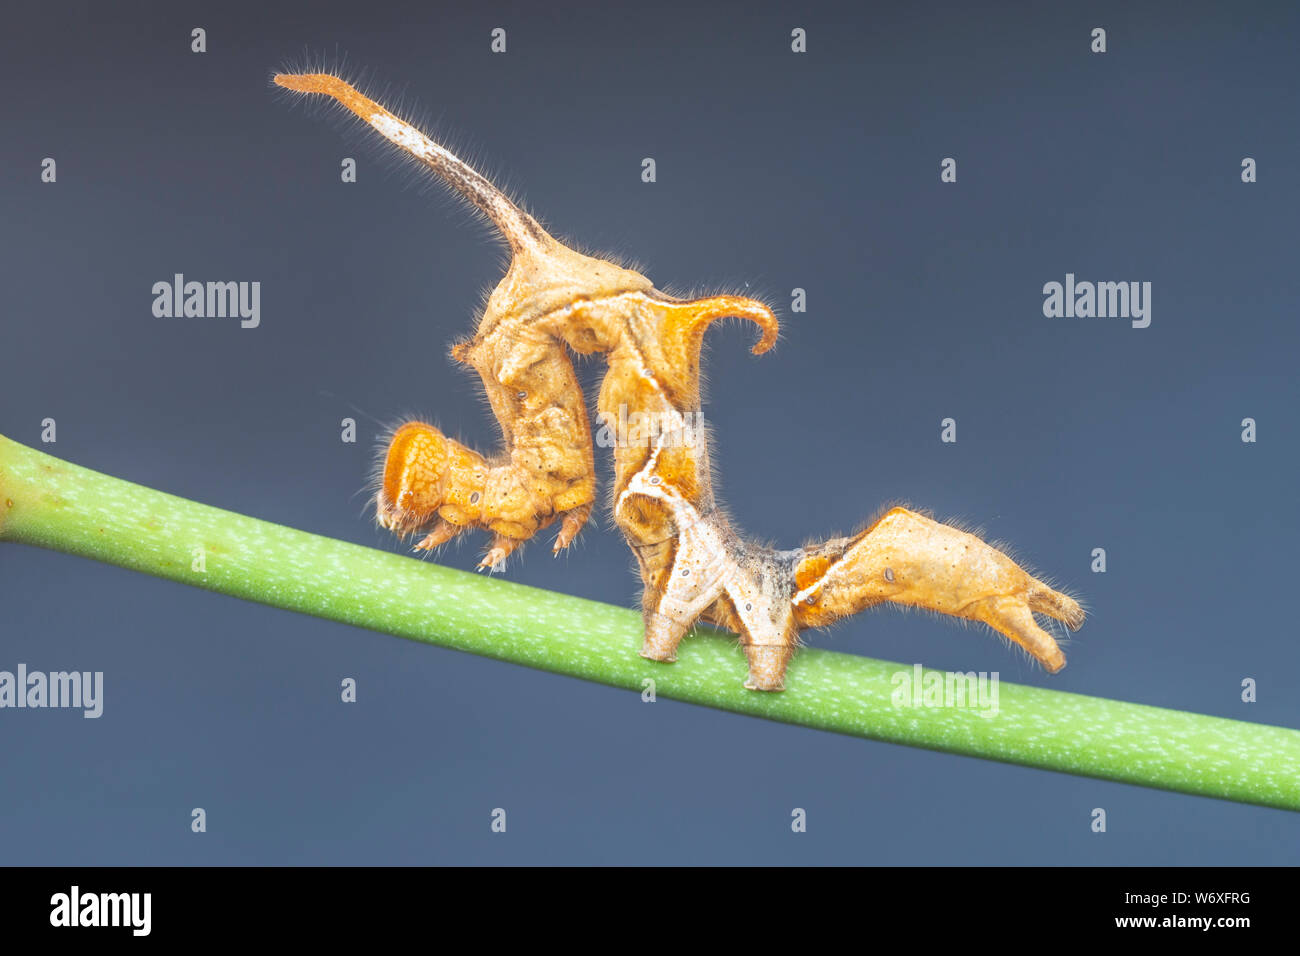 A Curve-lined Owlet Moth (Phyprosopus callitrichoides) caterpillar on a Greenbrier Leaf. Stock Photo